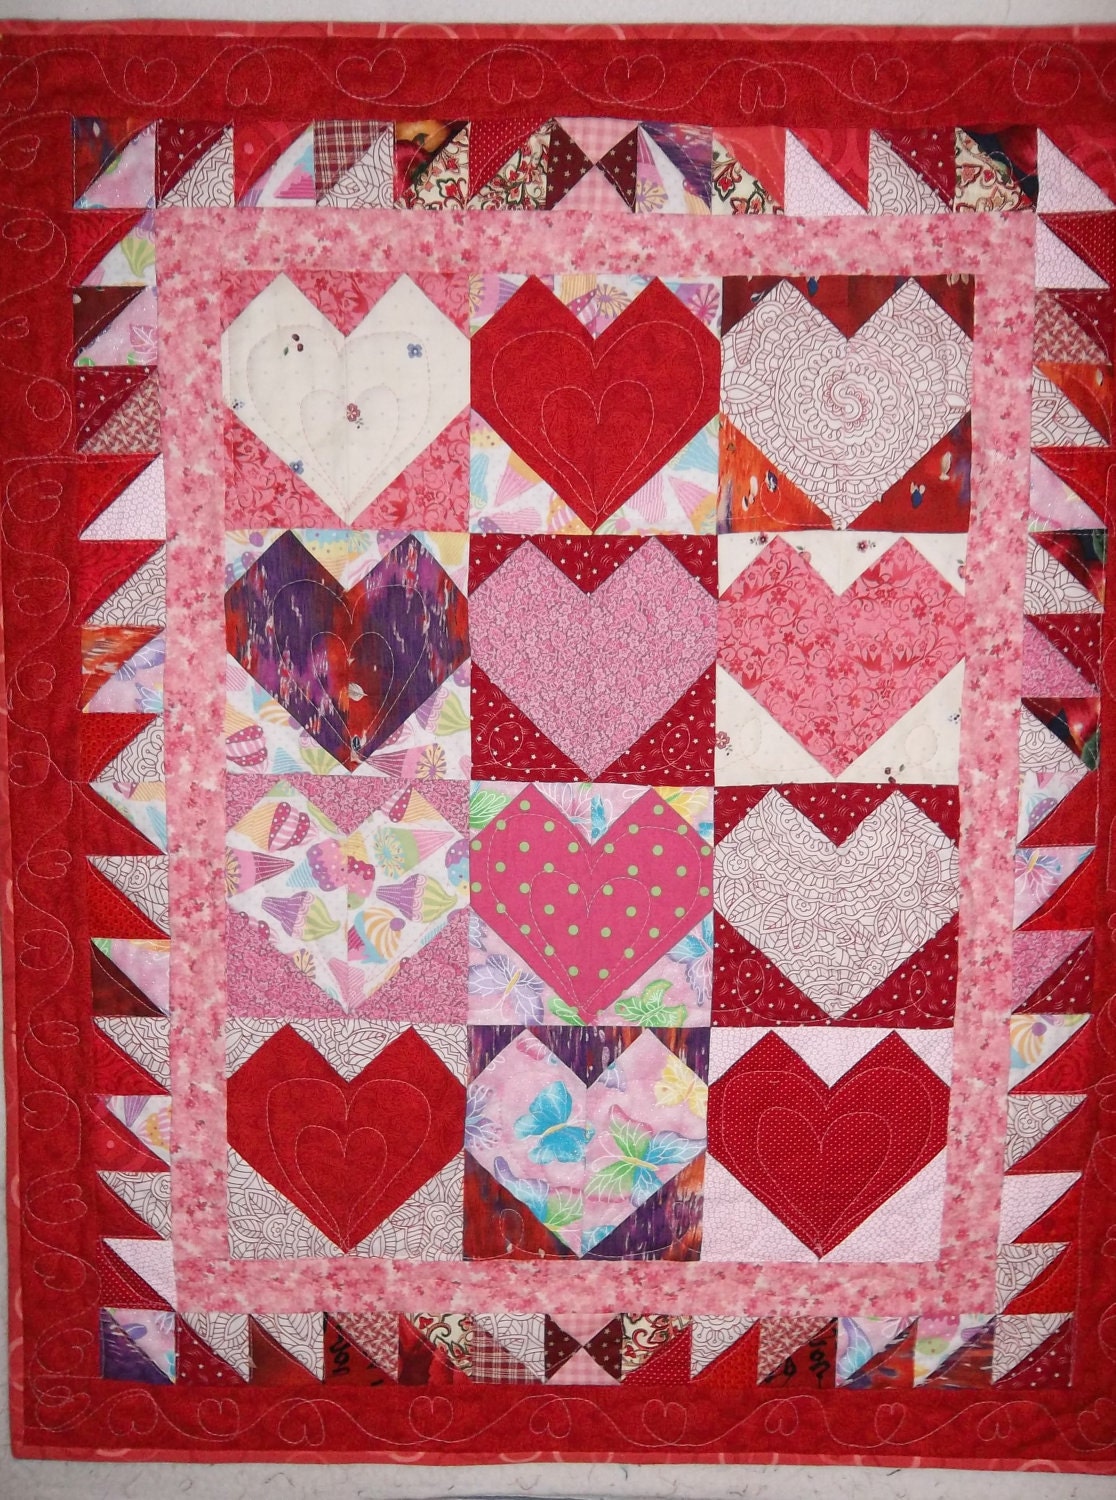 Patchwork Quilt, Lap or Wallhanging, Red and Pink Hearts